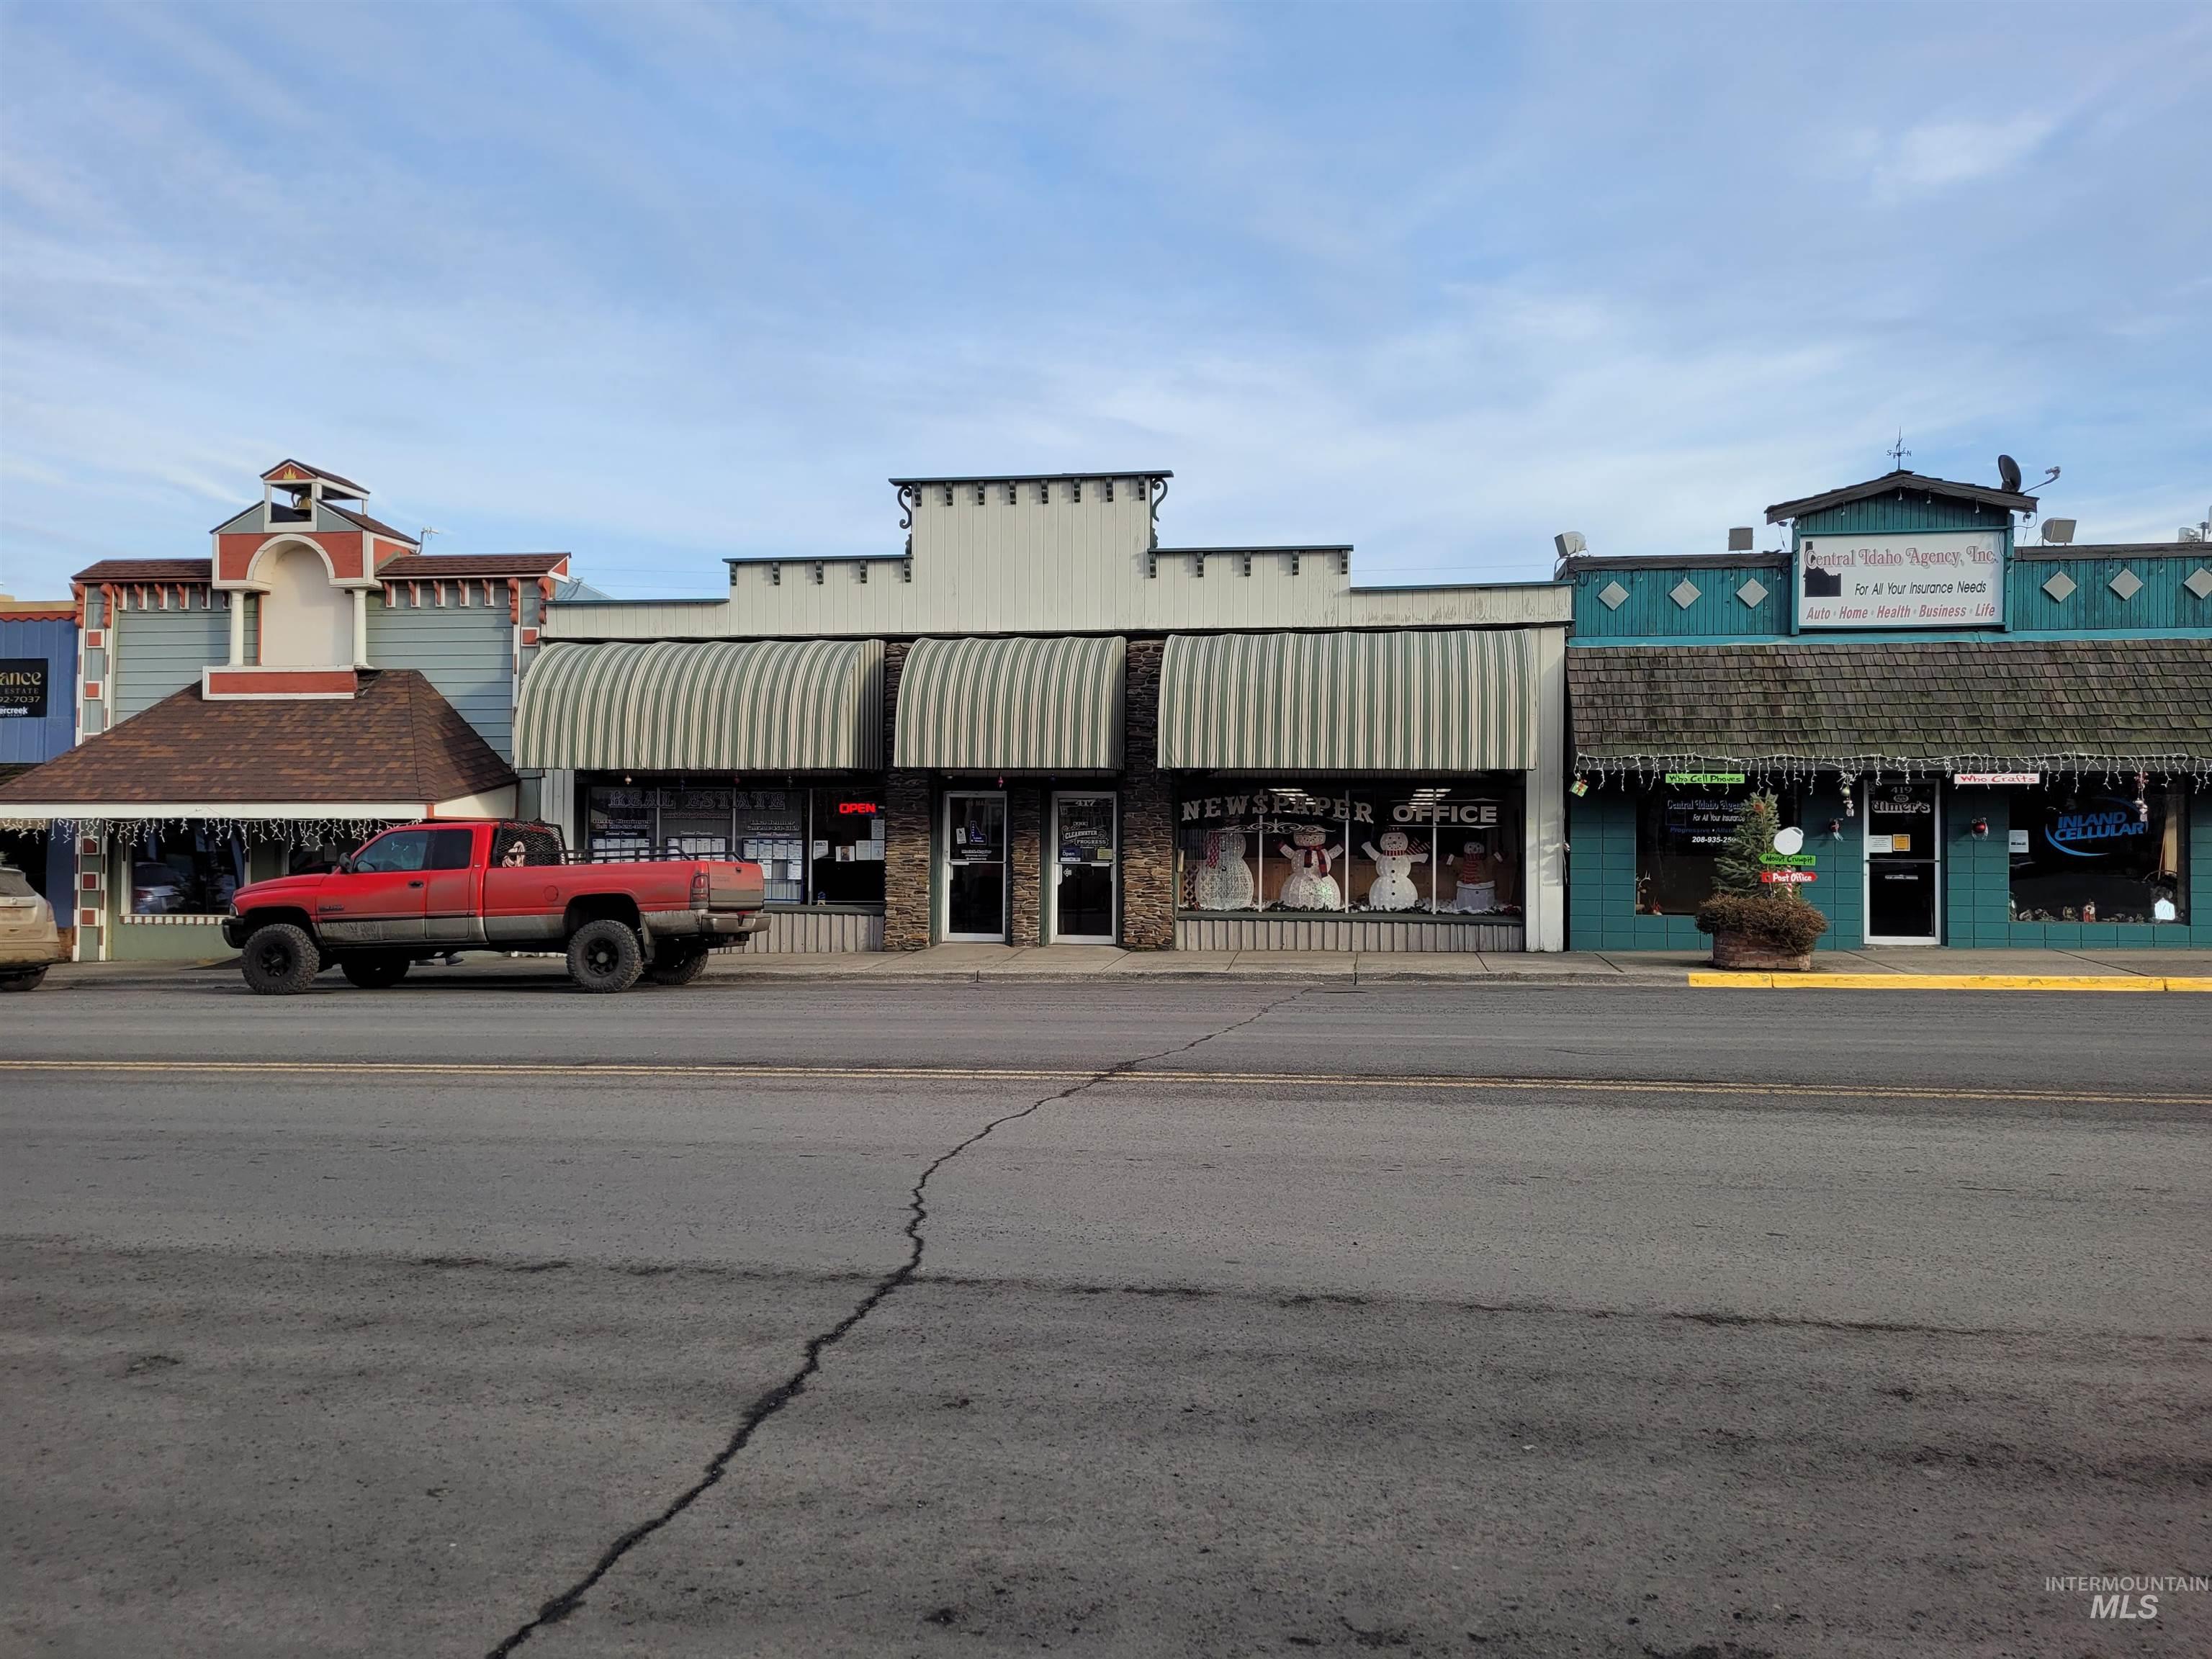 415 & 417 Main Street, Kamiah, Idaho 83536, Business/Commercial For Sale, Price $315,000,MLS 98897444